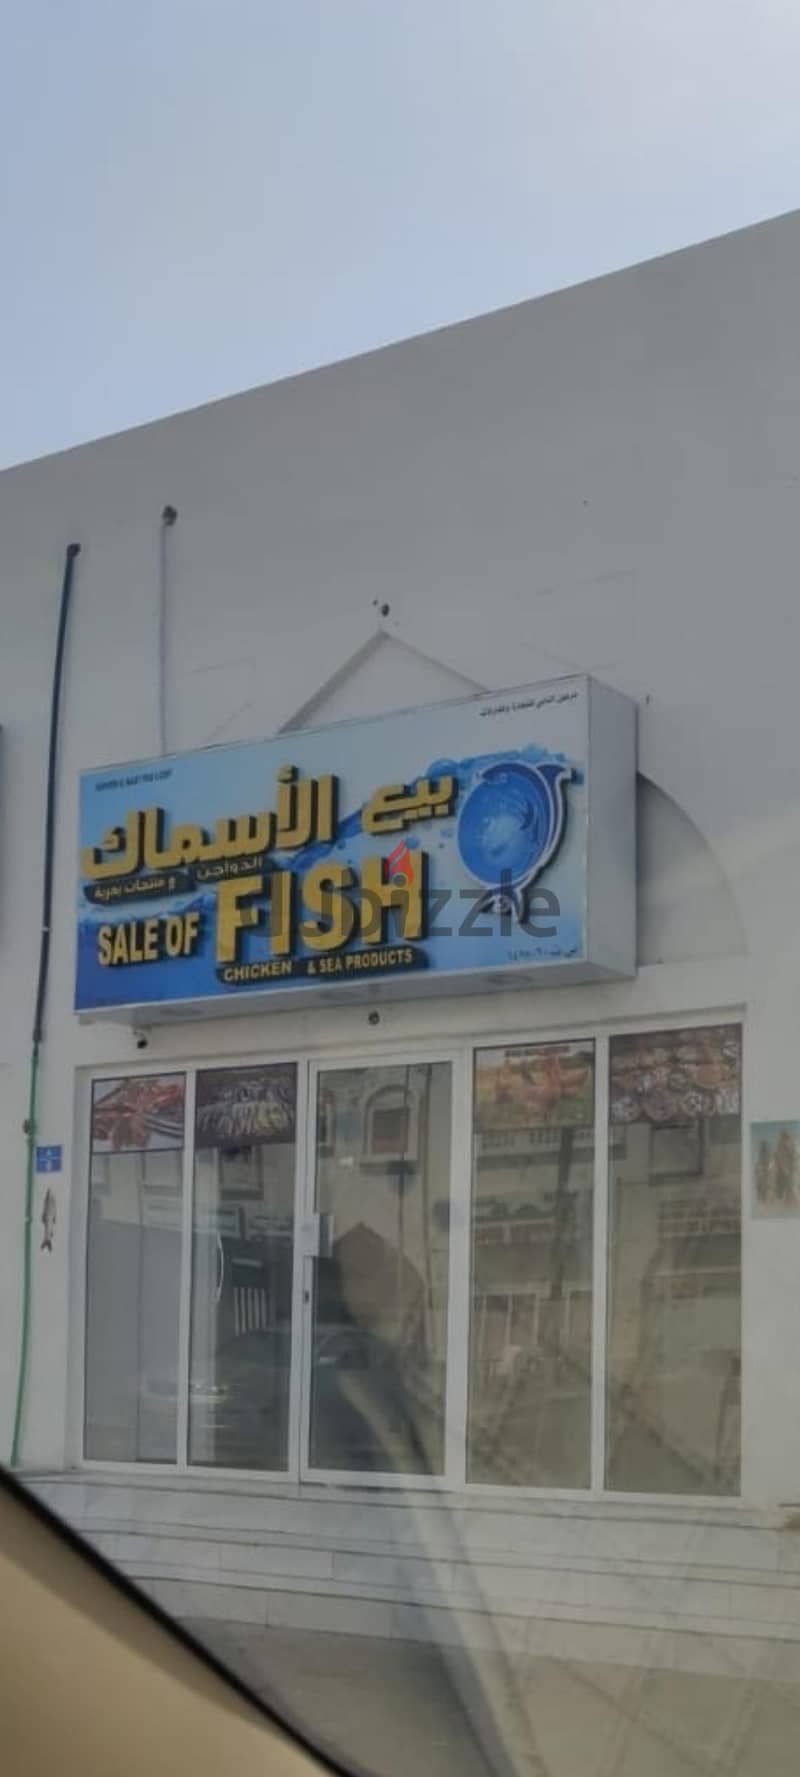 Sale of Fish and chiken shop azaiba 0